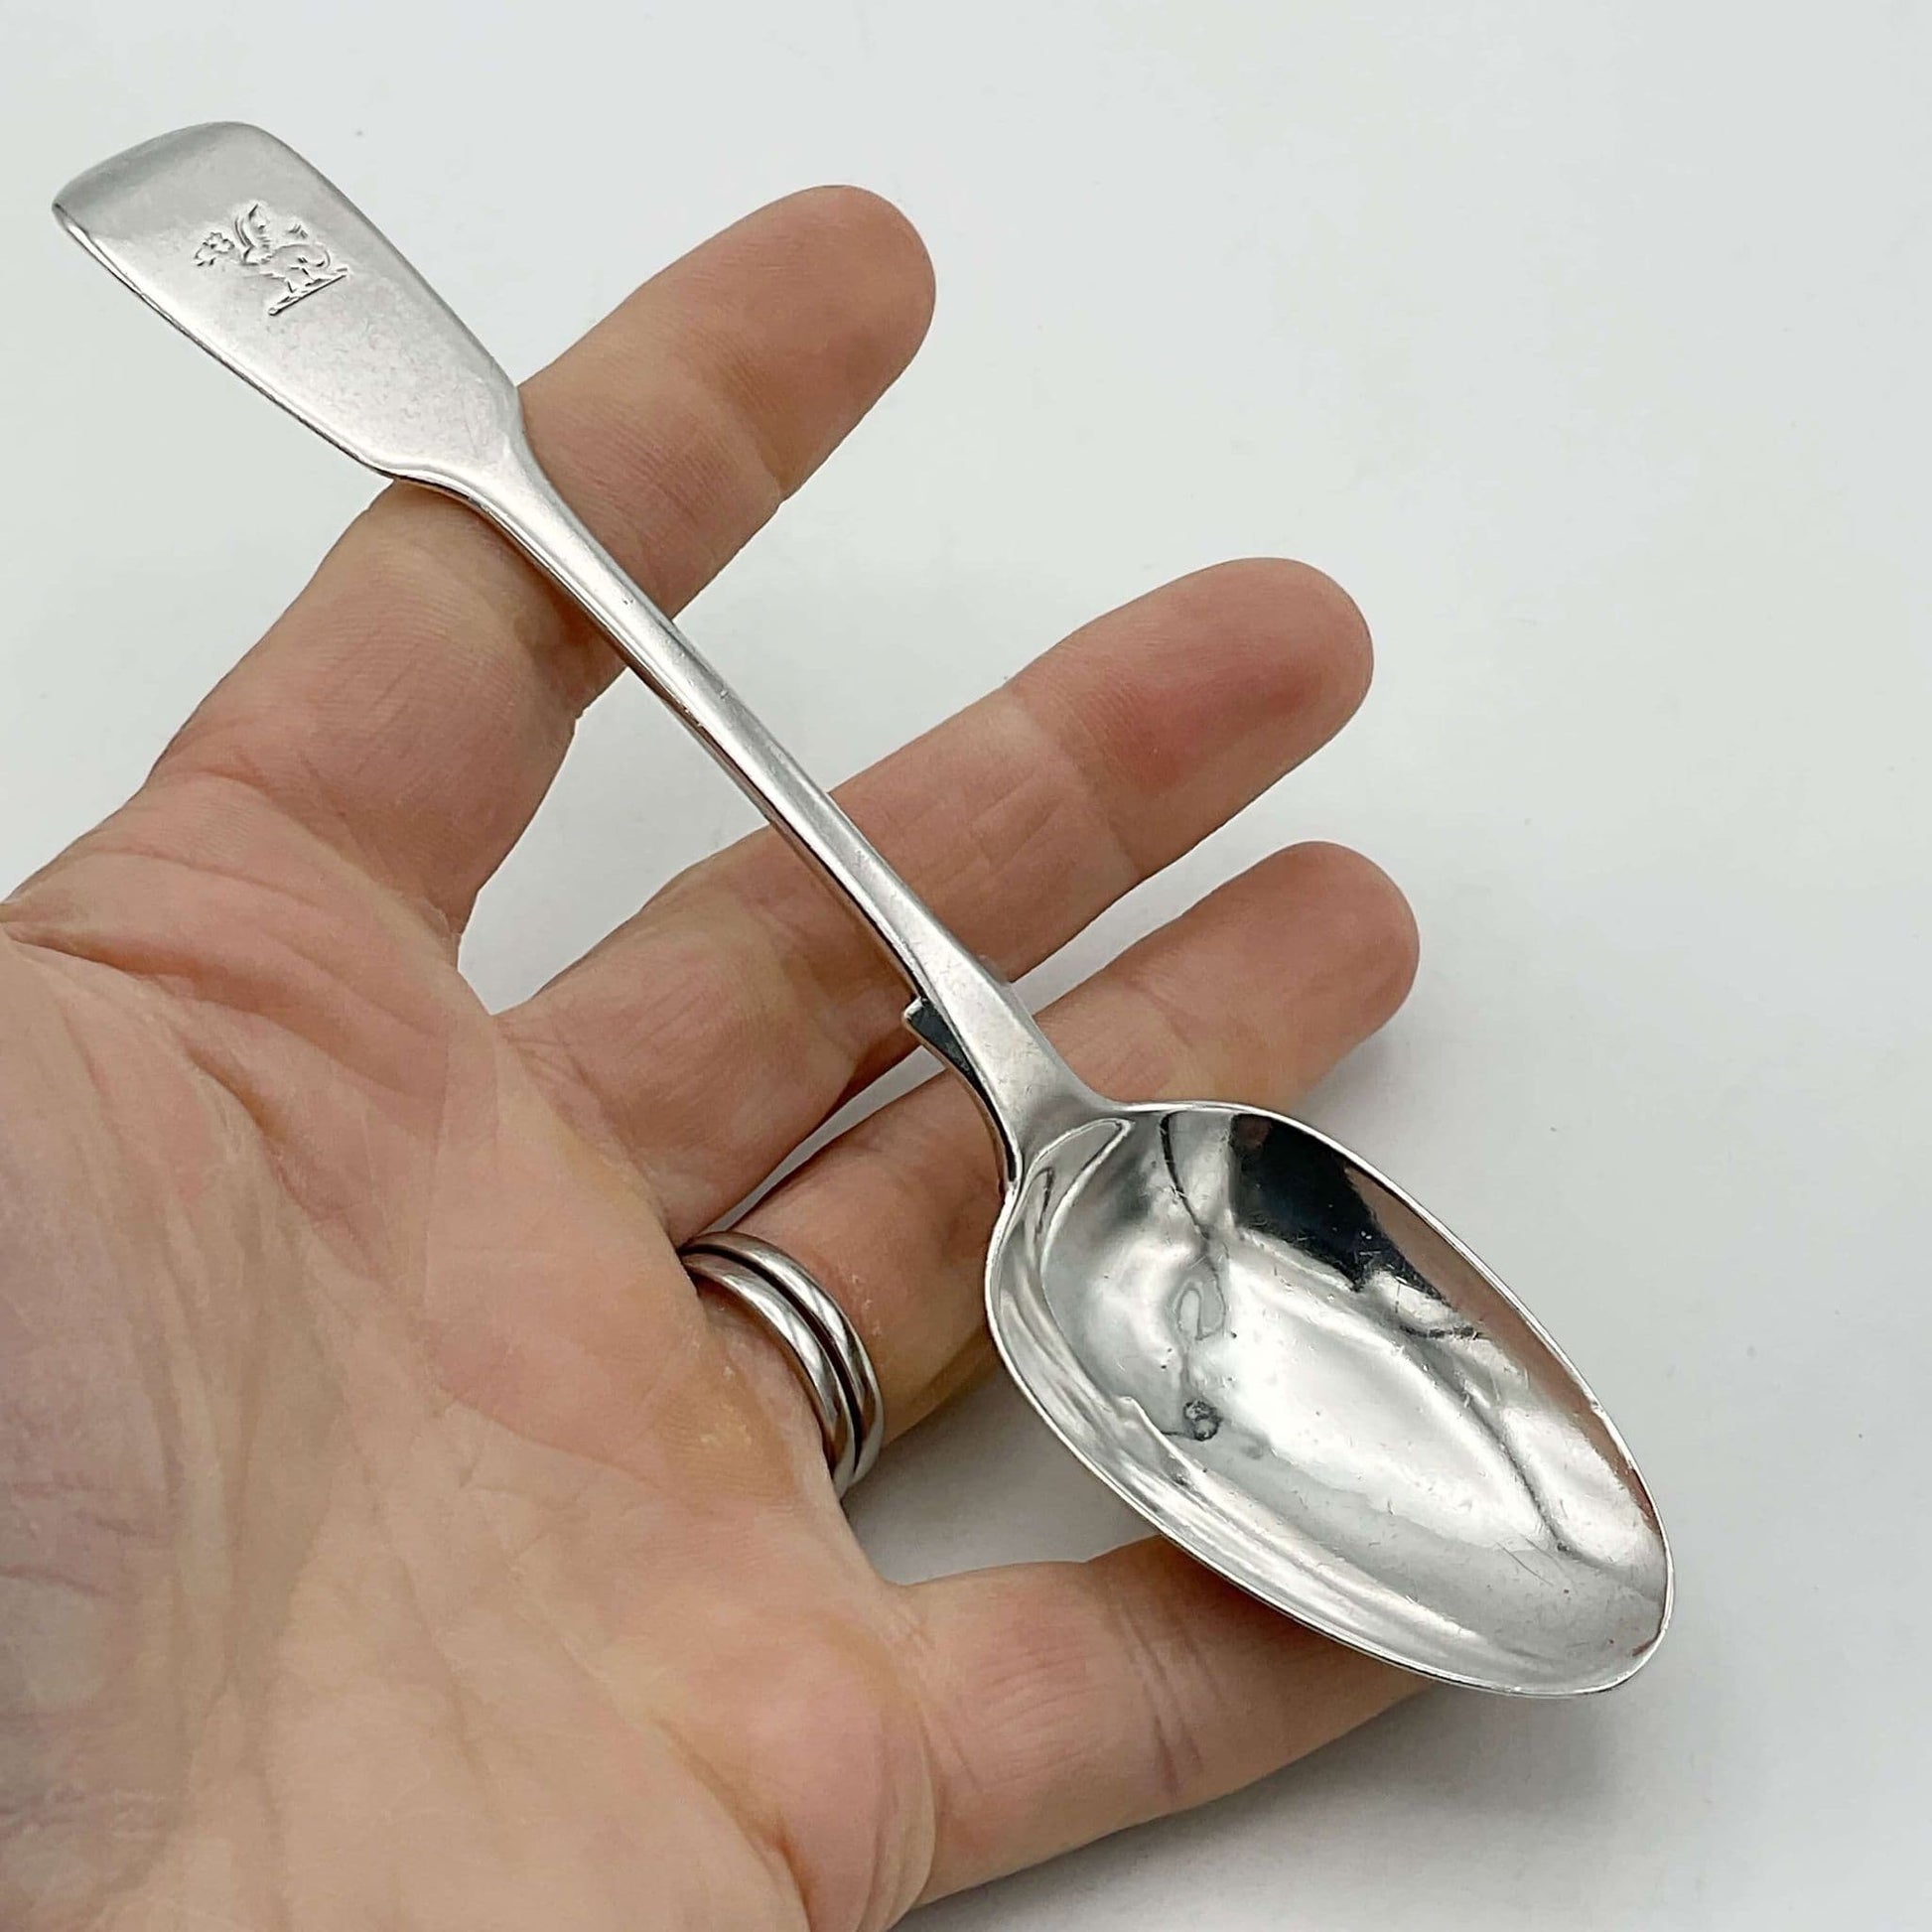 Antique silver teaspoon held in a hand